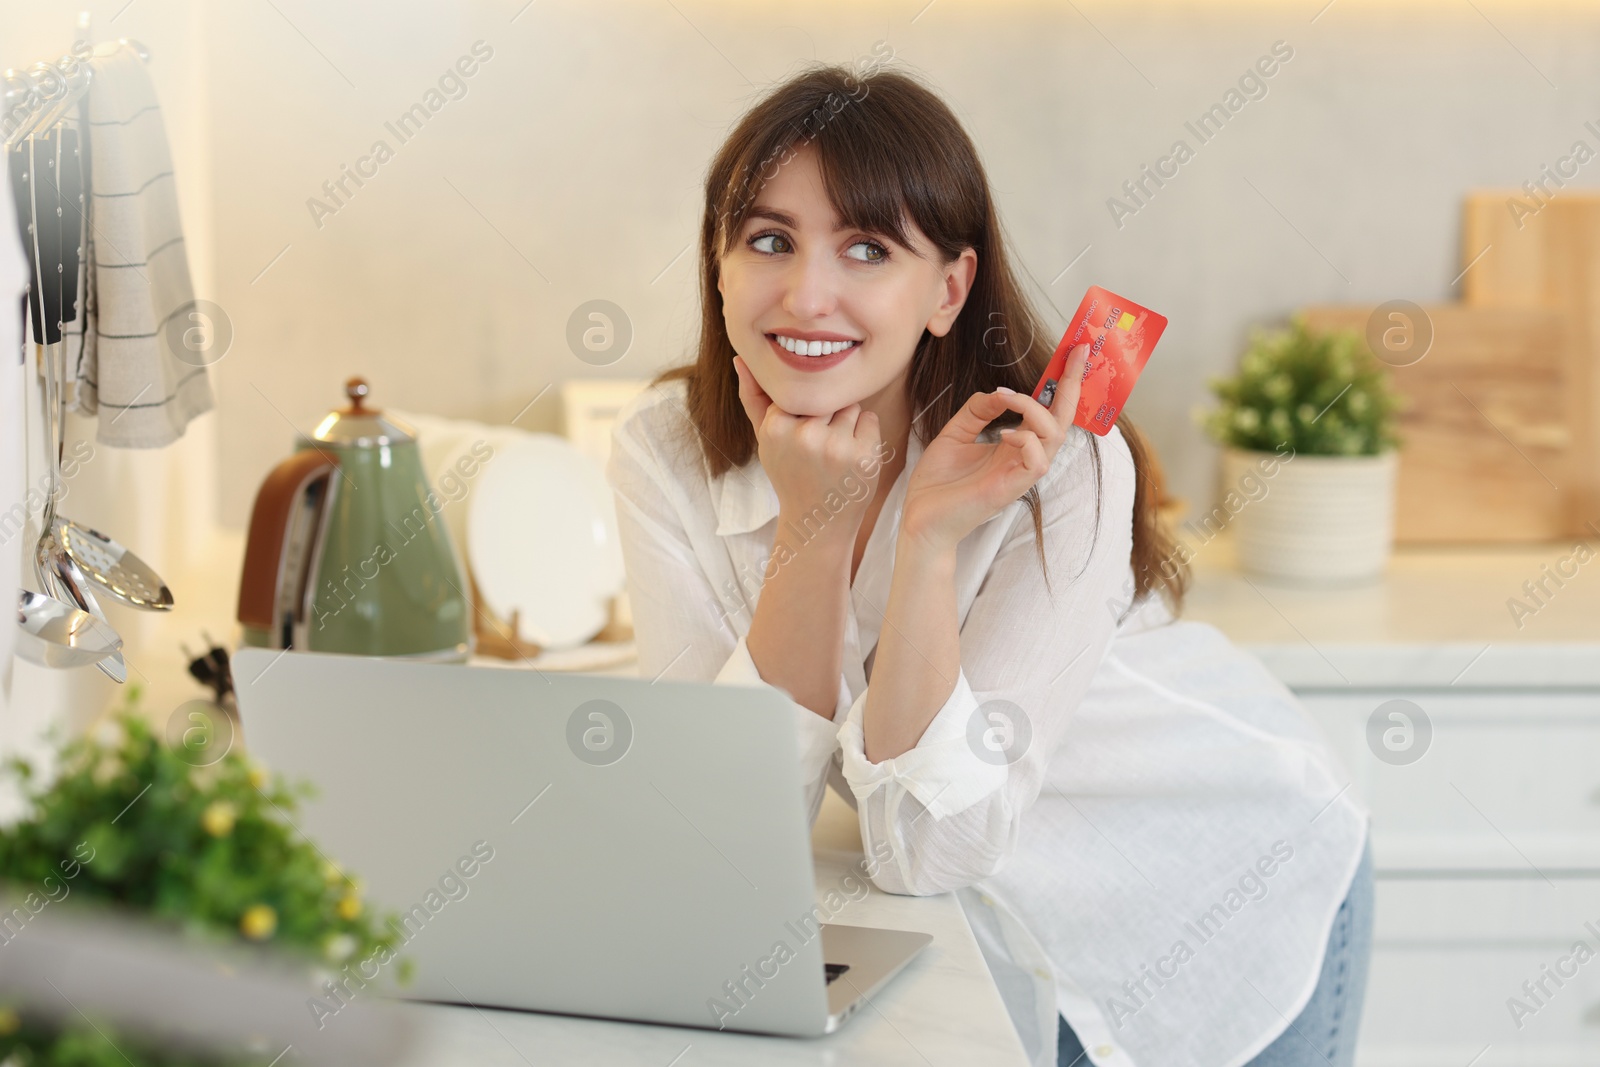 Photo of Online banking. Smiling woman with credit card and laptop paying purchase in kitchen